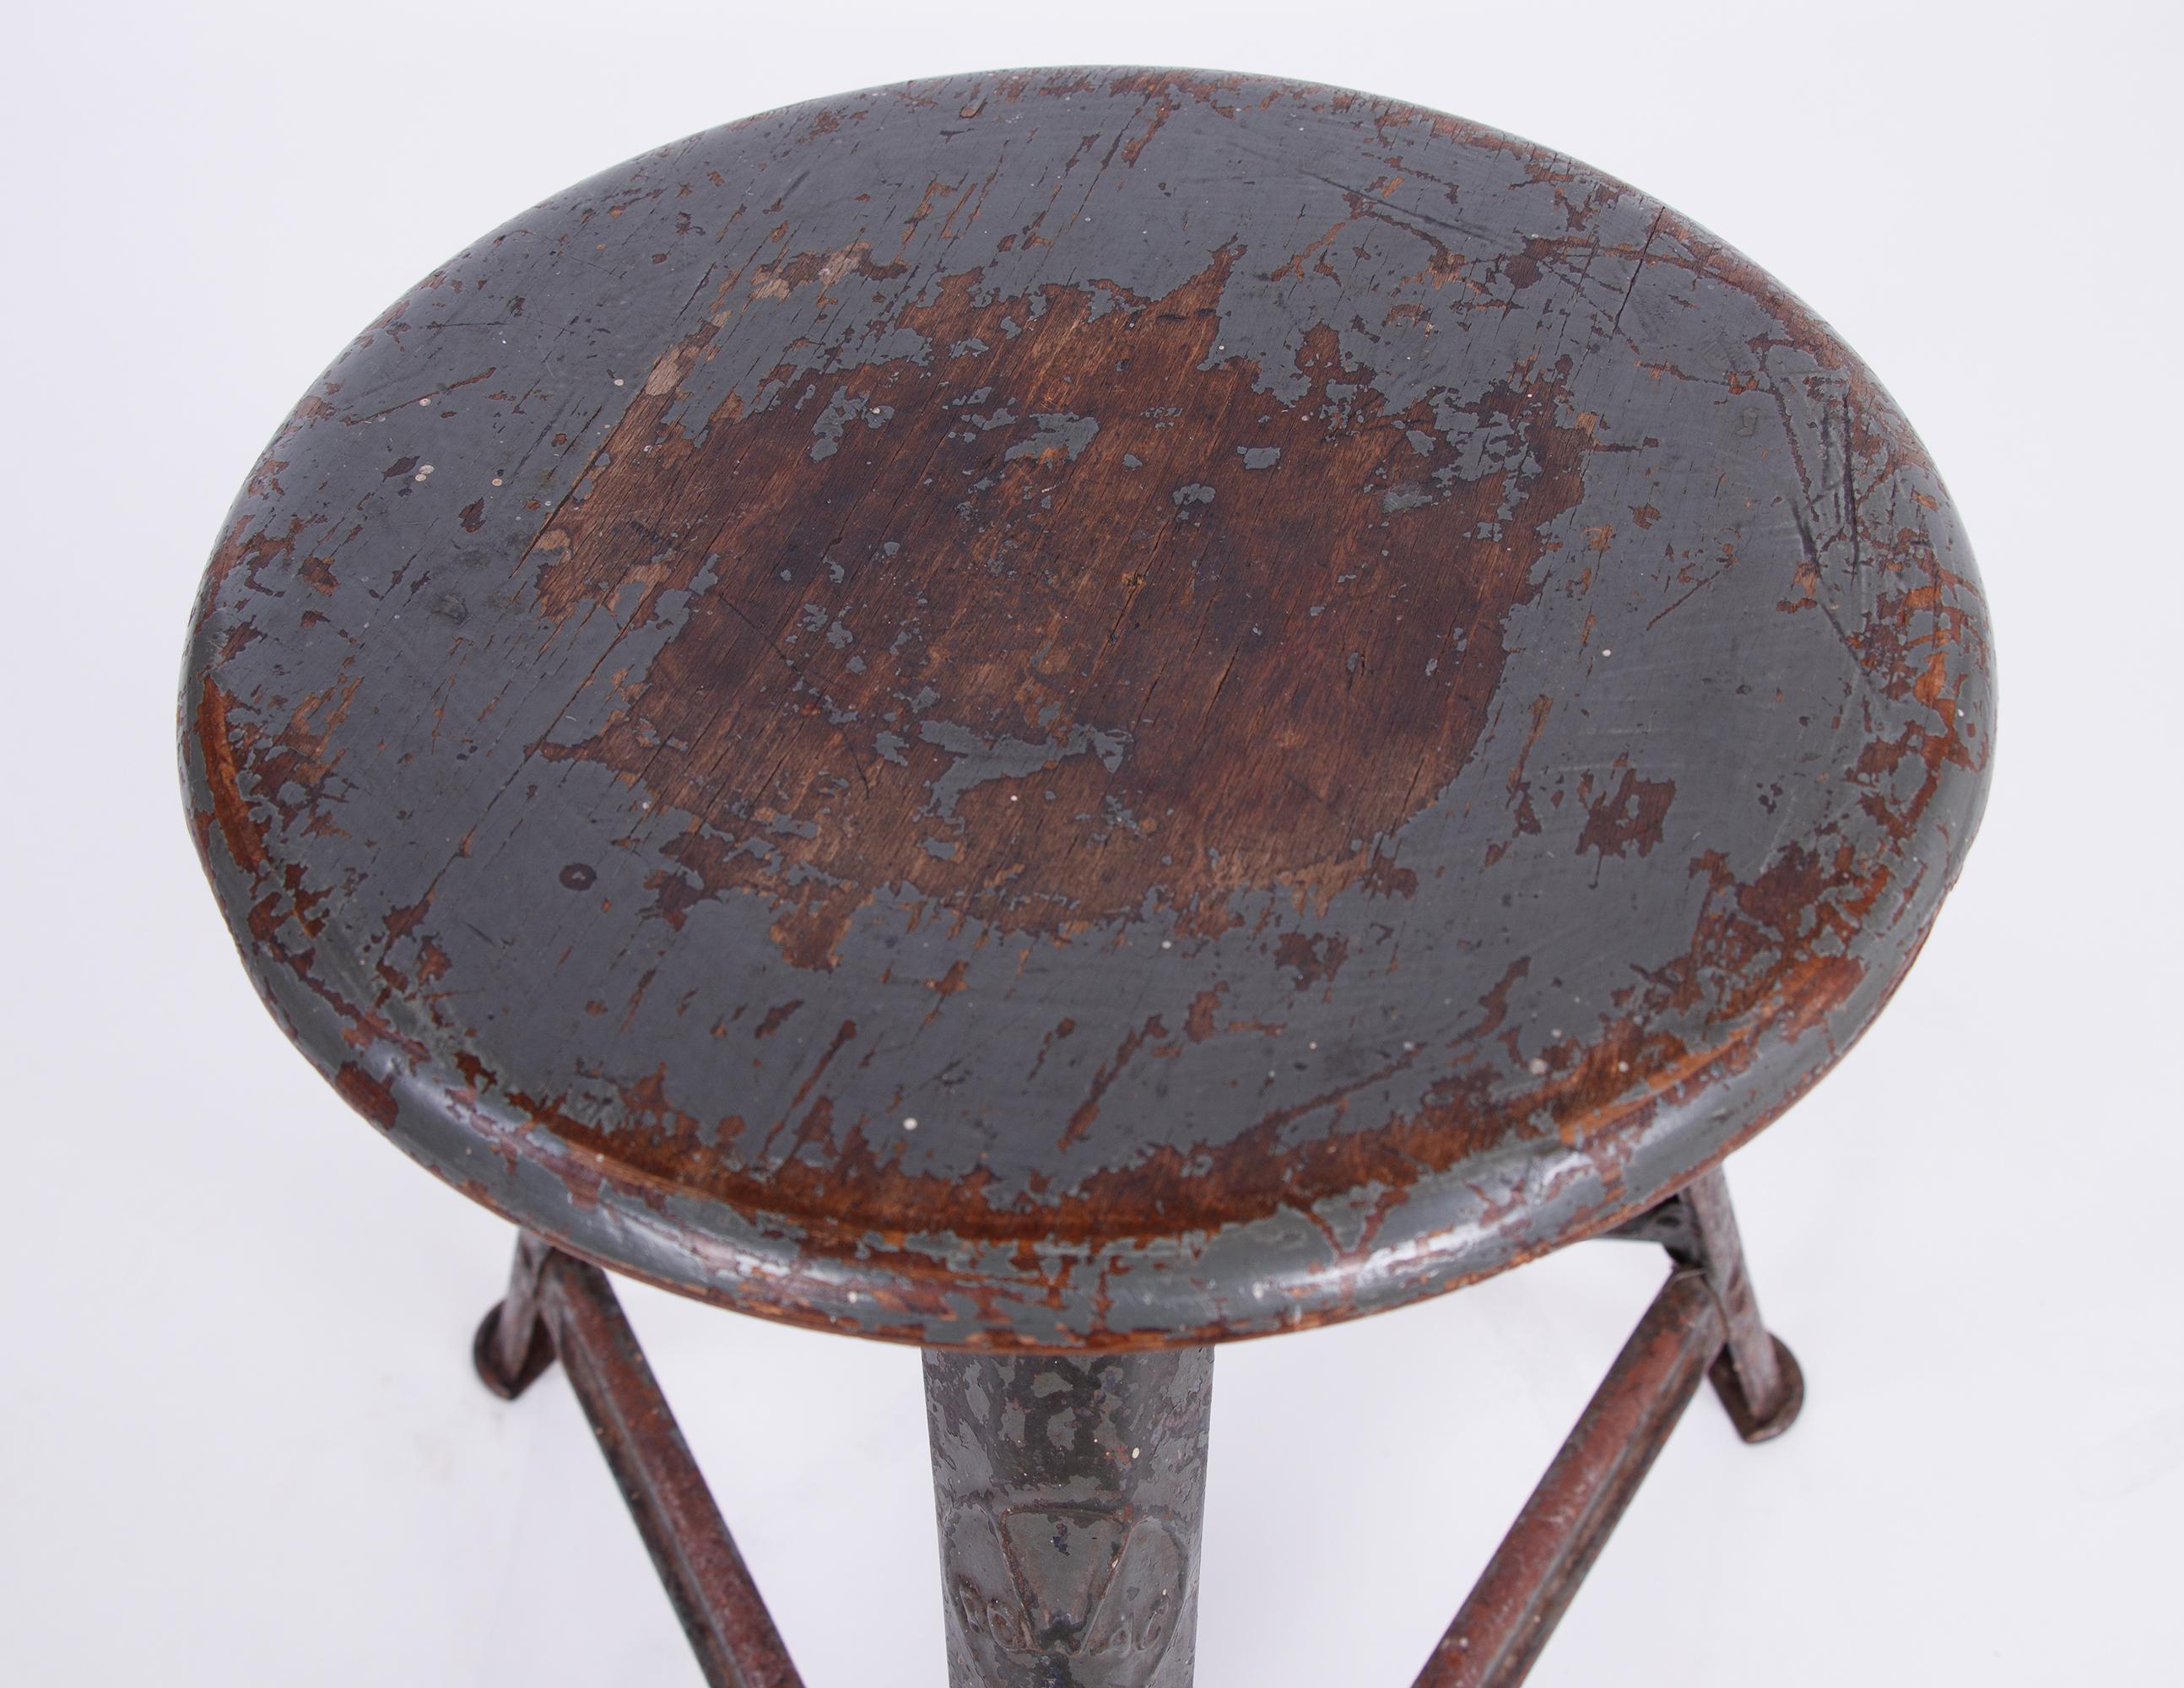 Hand-Crafted Industrial Factory Bauhaus Stool by Rowac / Robert Wagner Germany, 1910-1920s For Sale